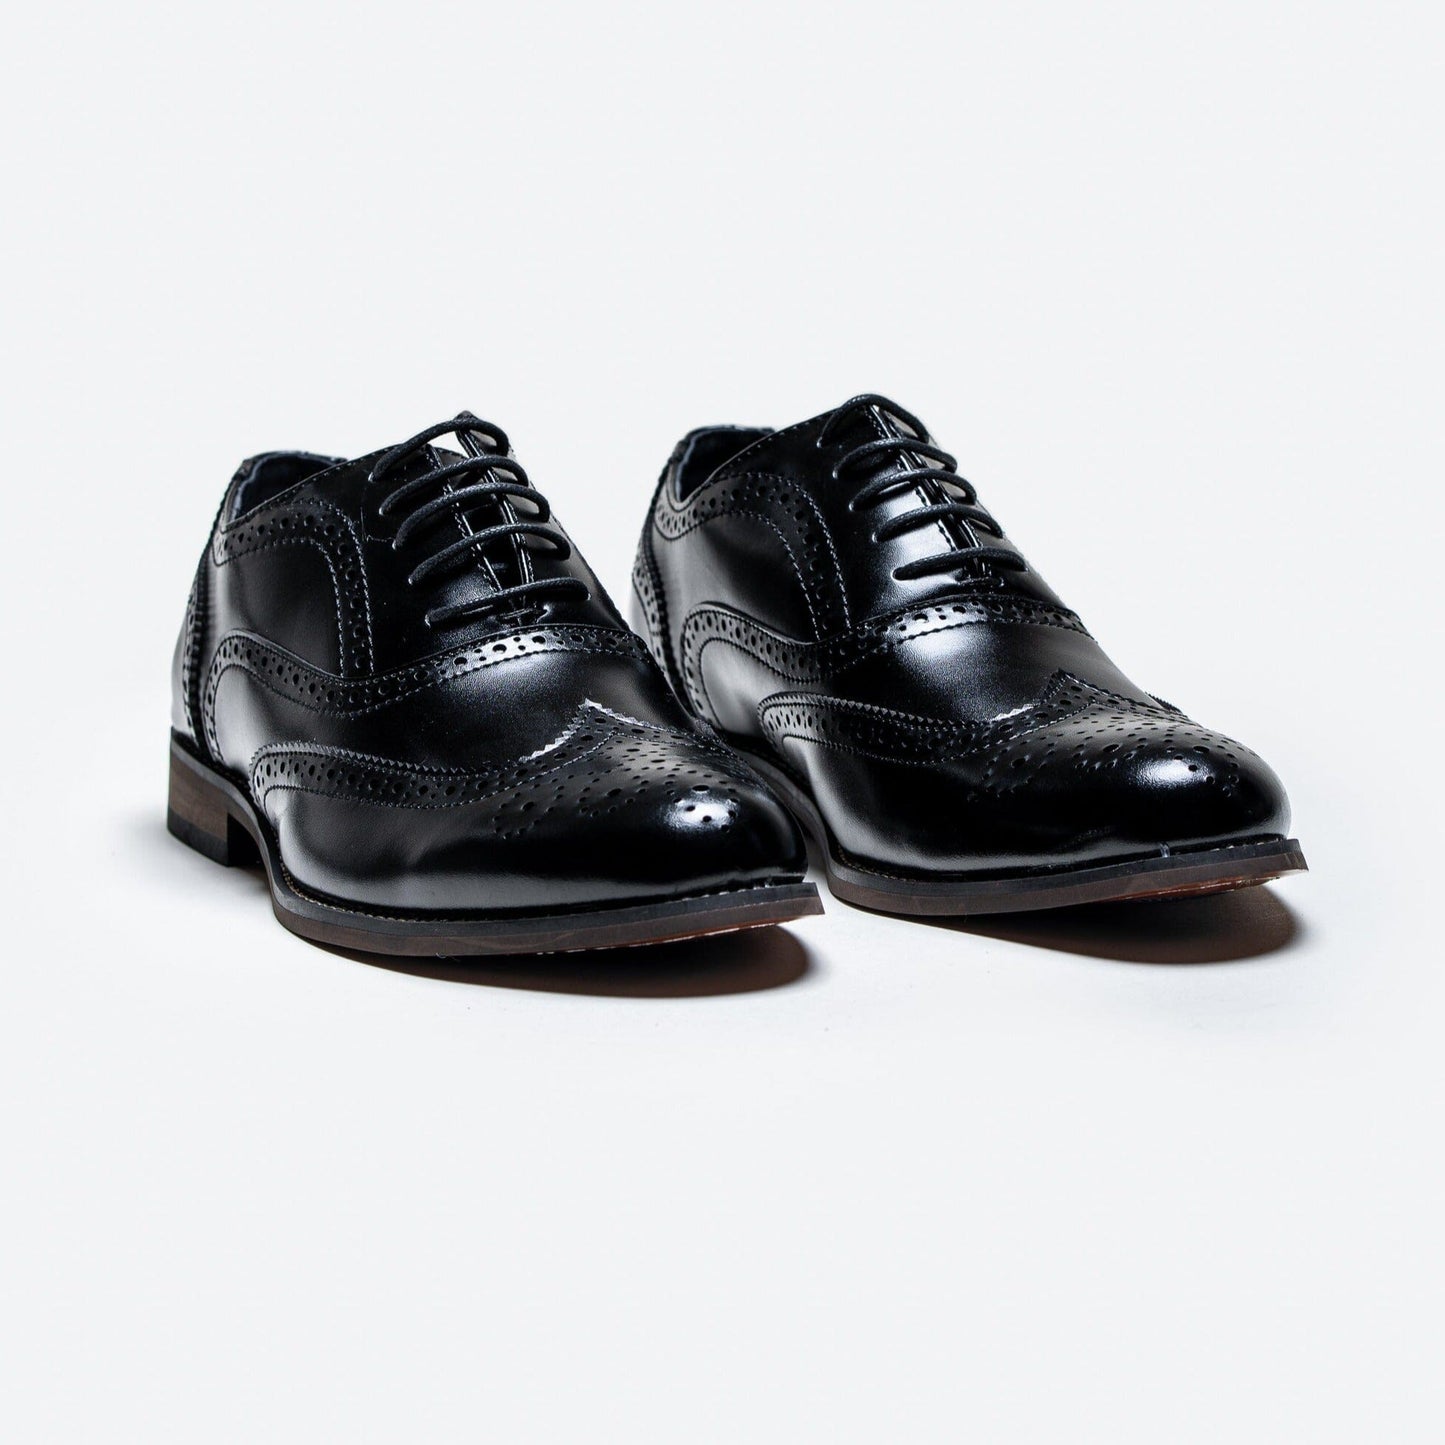 Clark Black Brogue Shoes - OOS - 2/8/23 - Shoes - - THREADPEPPER